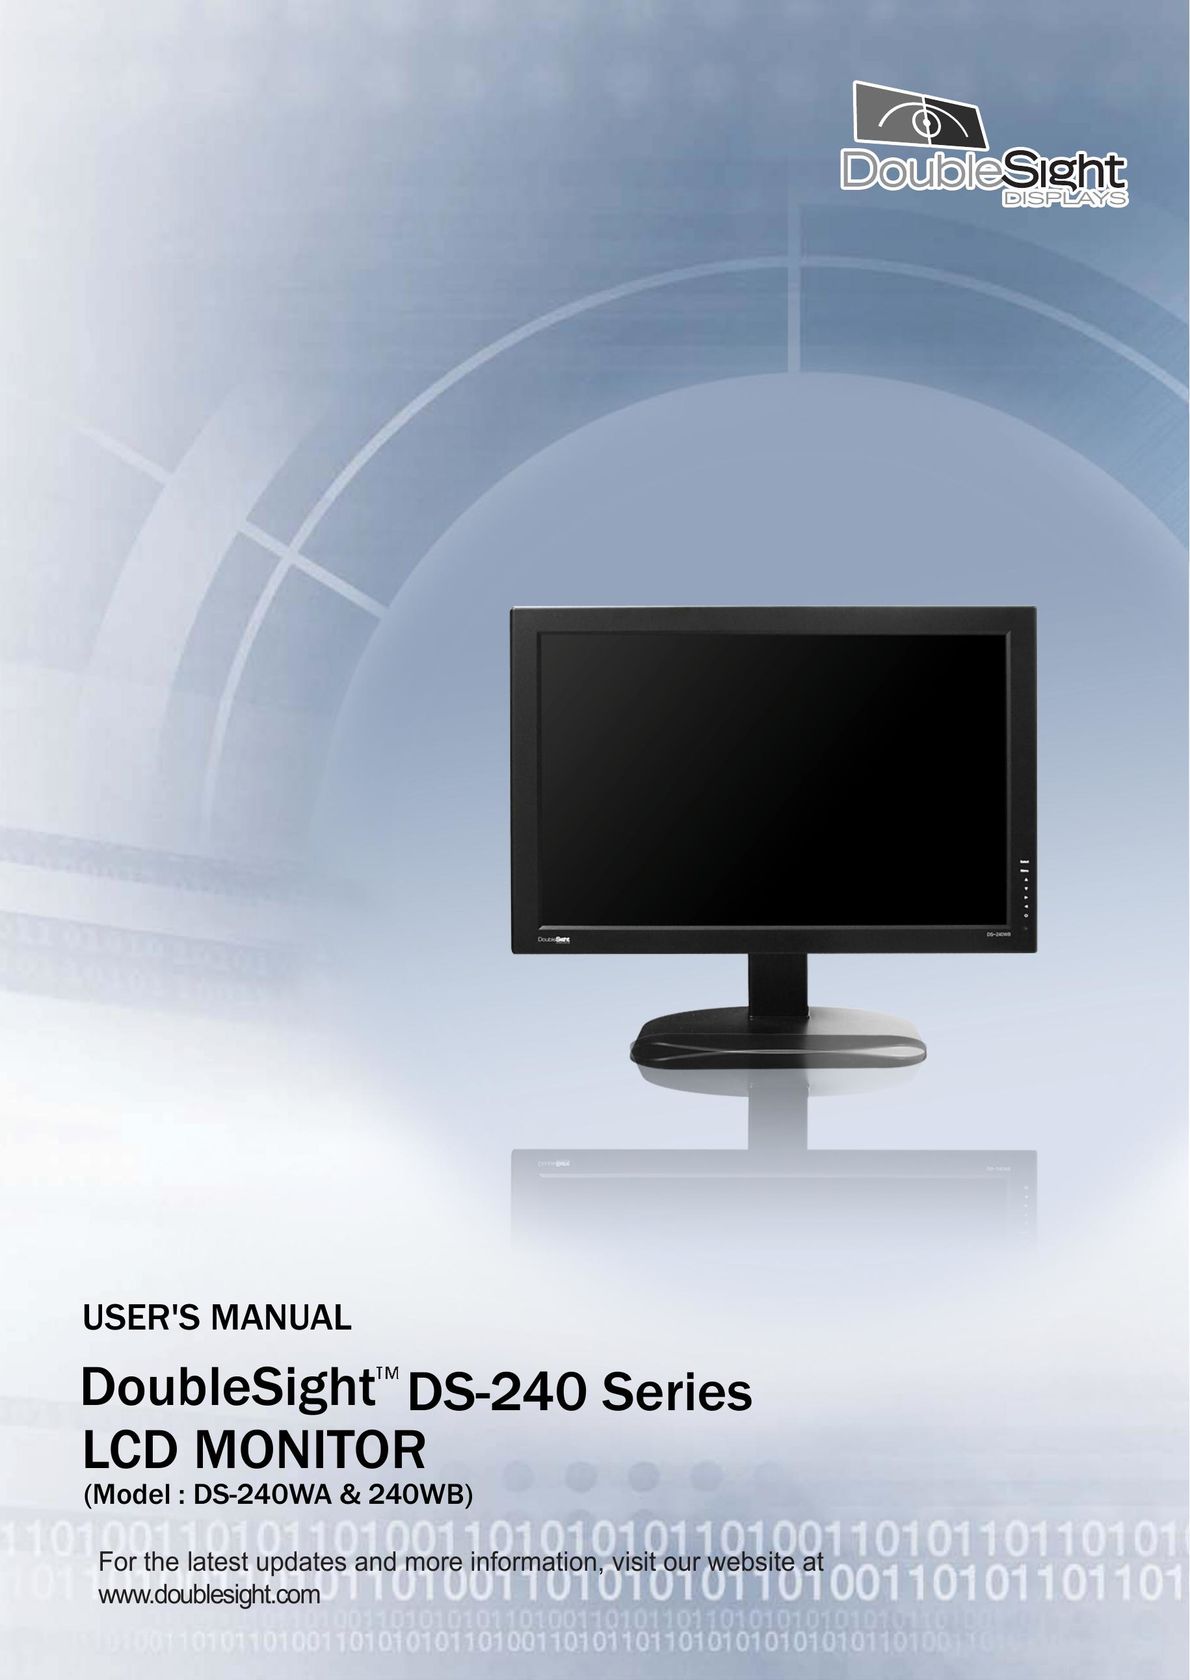 DoubleSight Displays DS-240 Series Computer Monitor User Manual